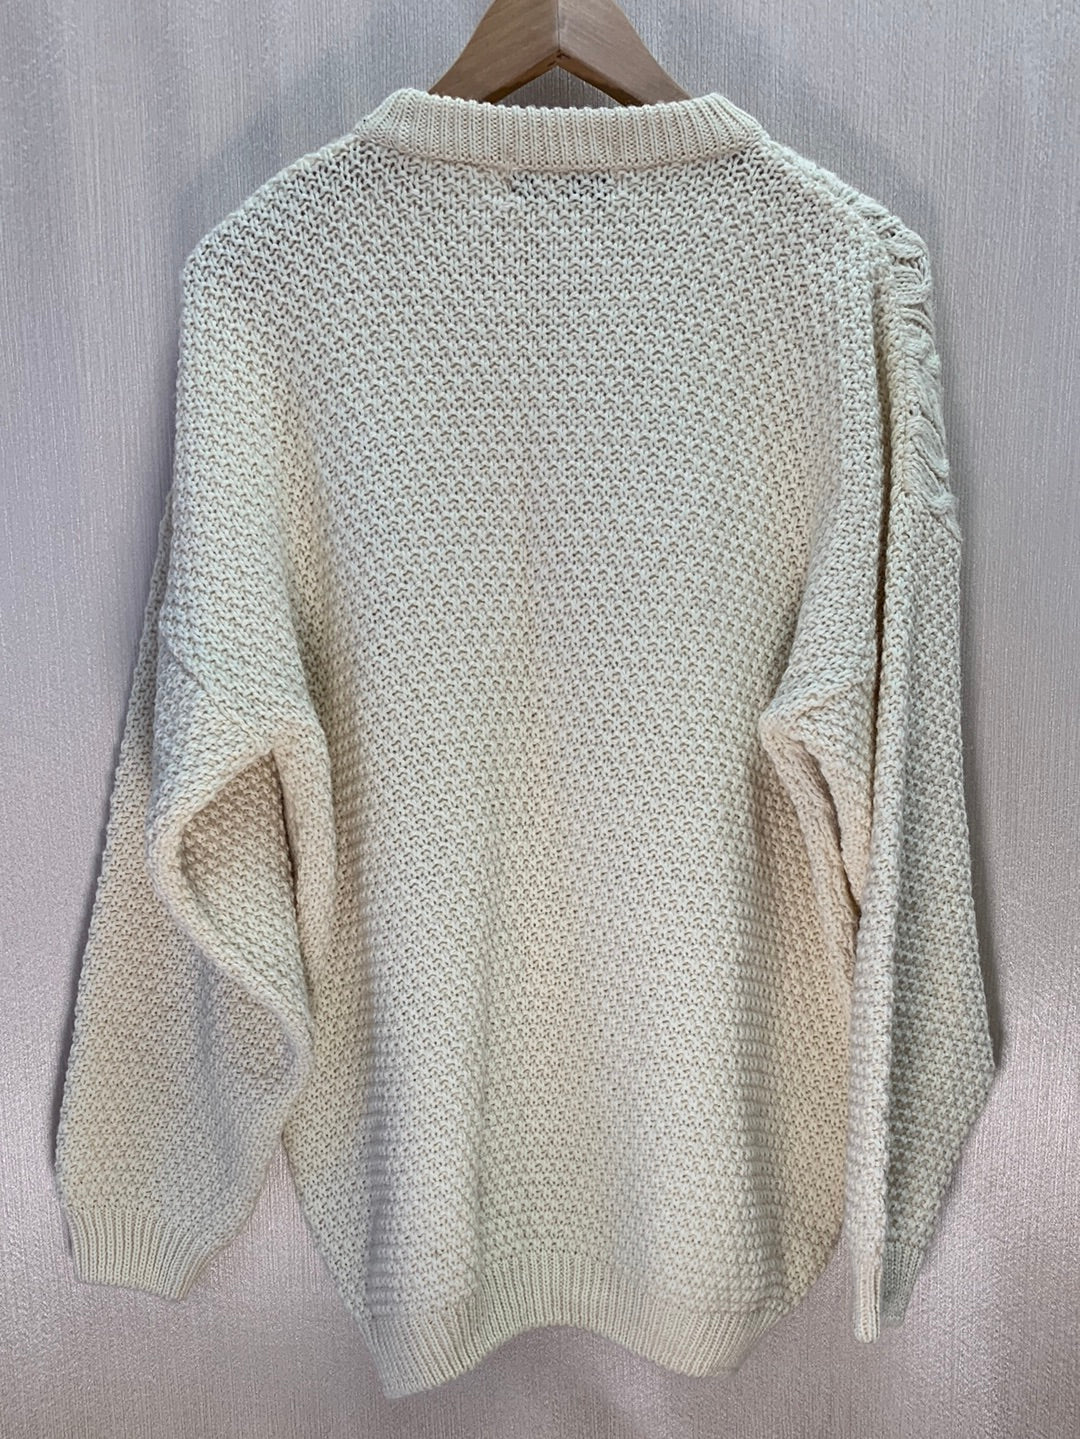 Vintage - HIGHLAND HOME ivory Wool Cable Knit Fisherman Sweater - XL